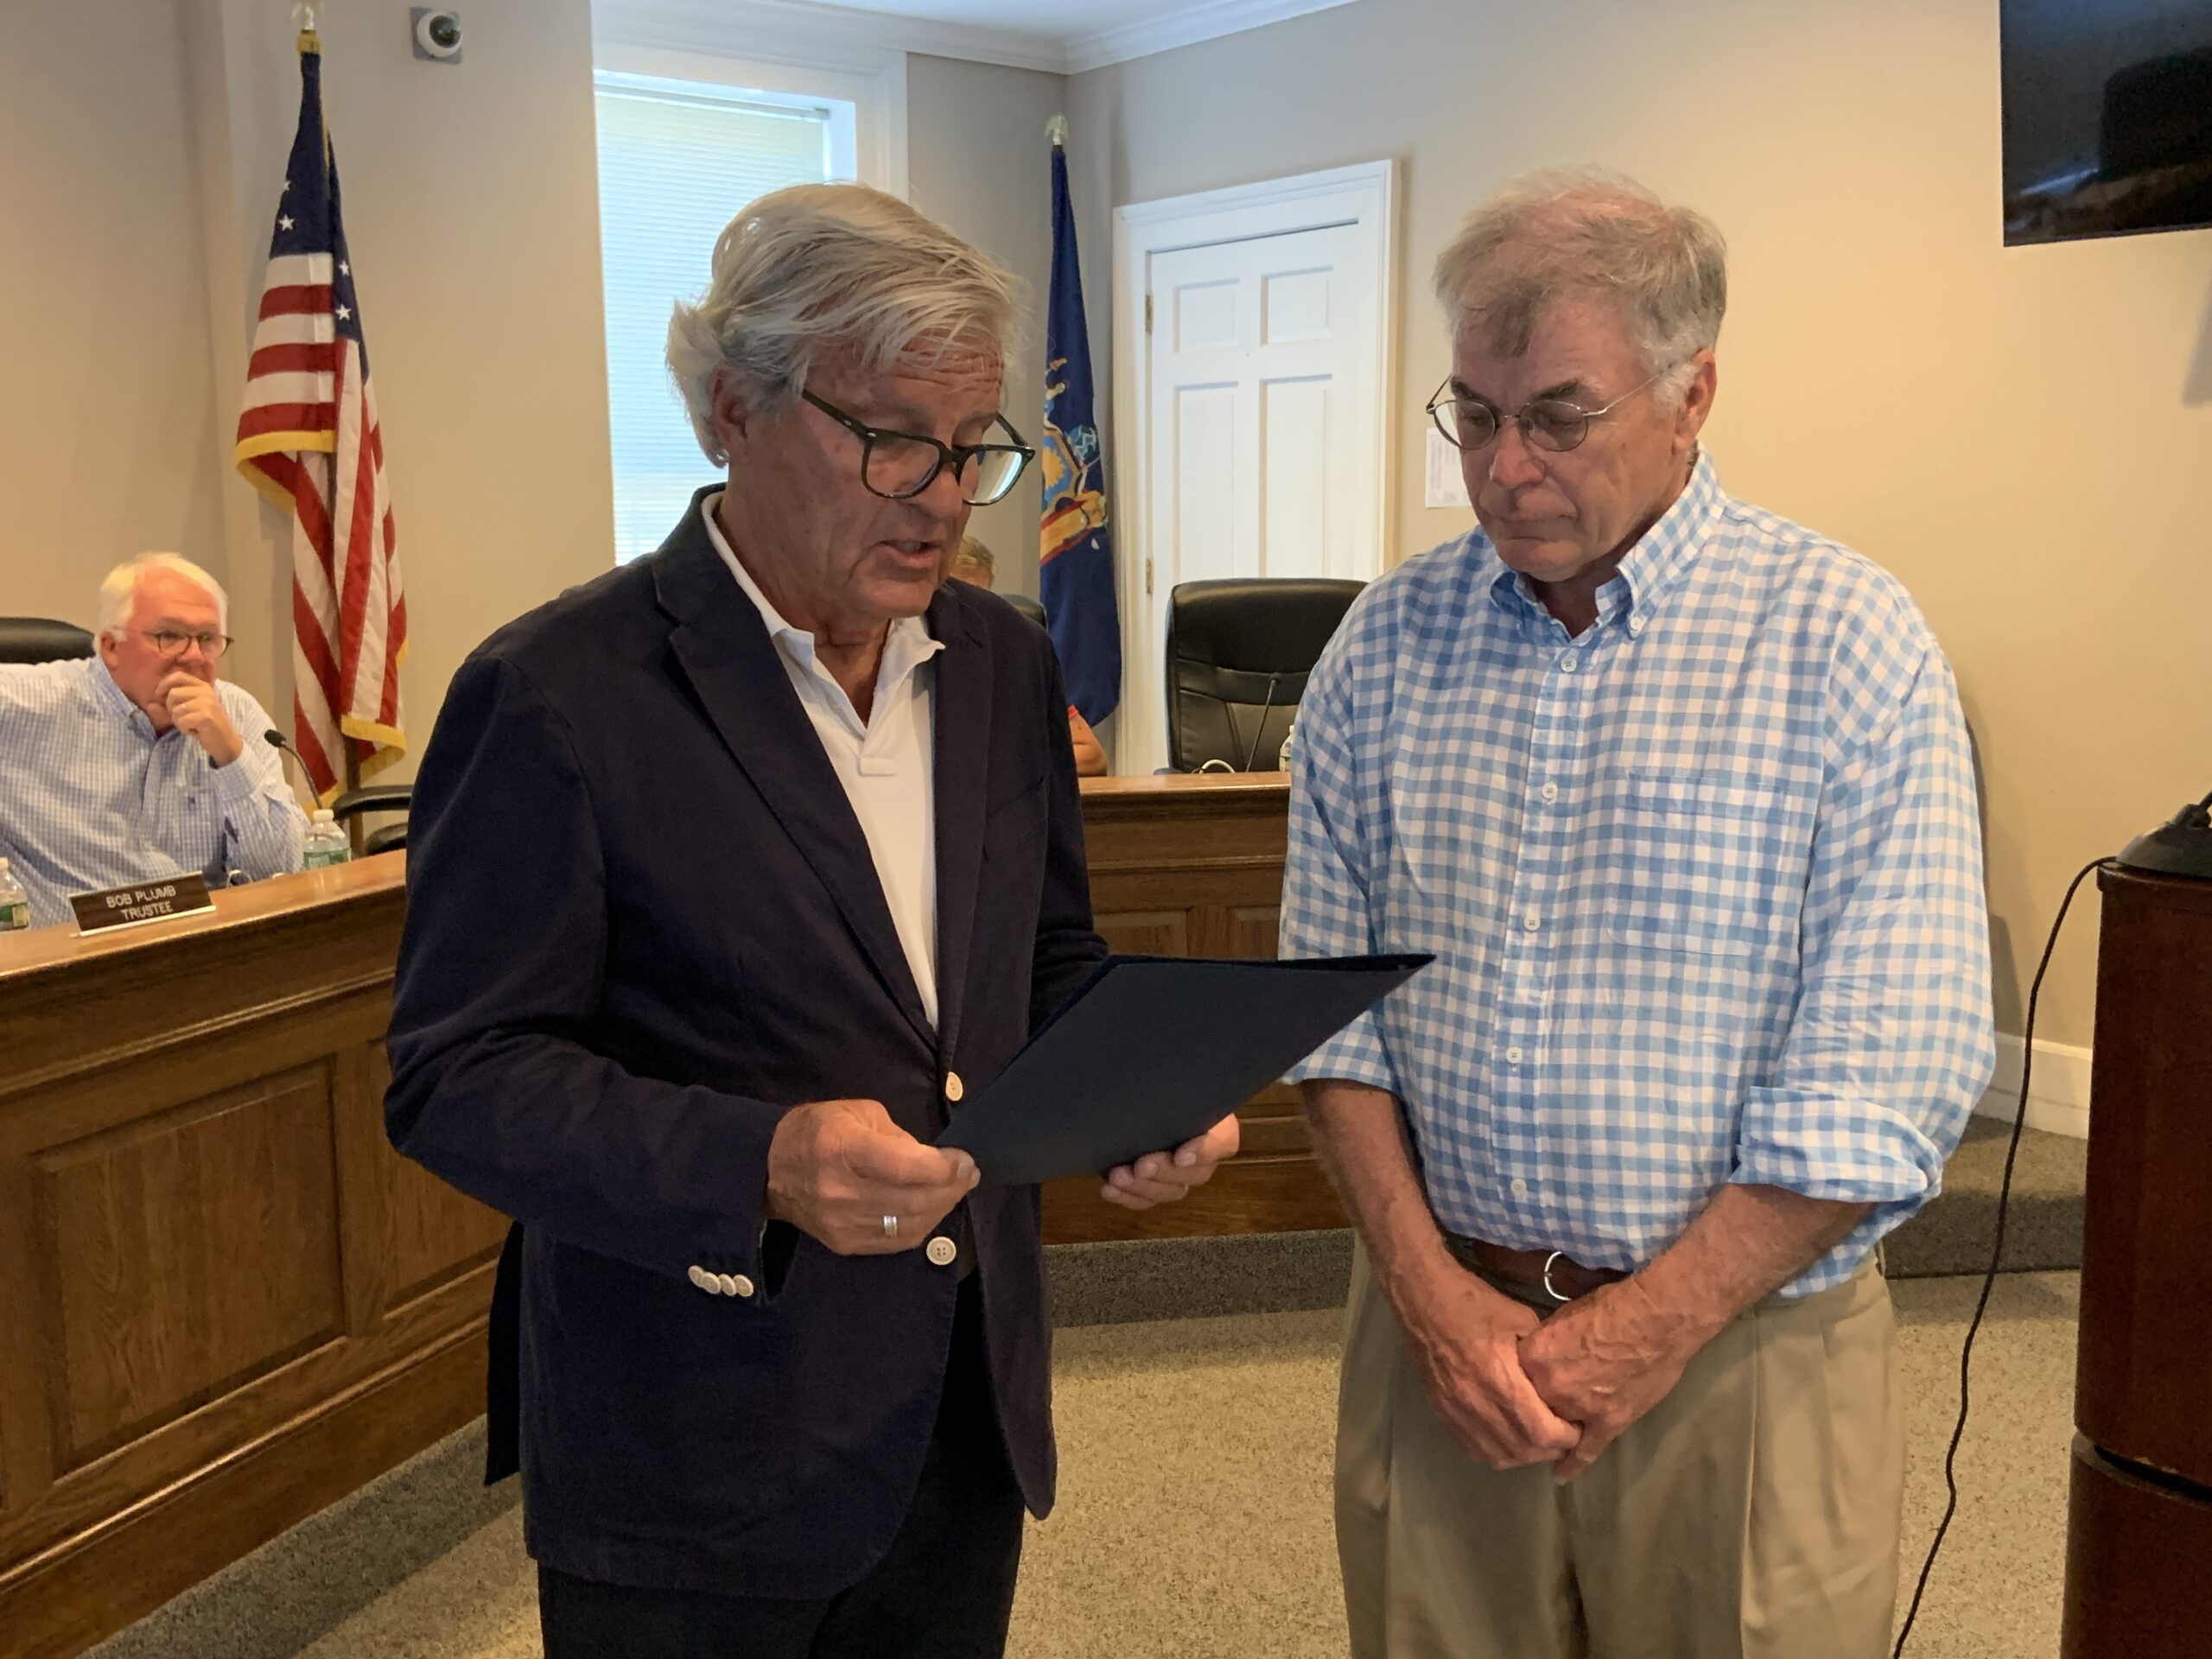 Mayor Jim Larocca, left, presents Dennis Winter with a proclamation honoring him for rescuing a woman from a burning boat on May 29. STEPHEN J. KOTZ